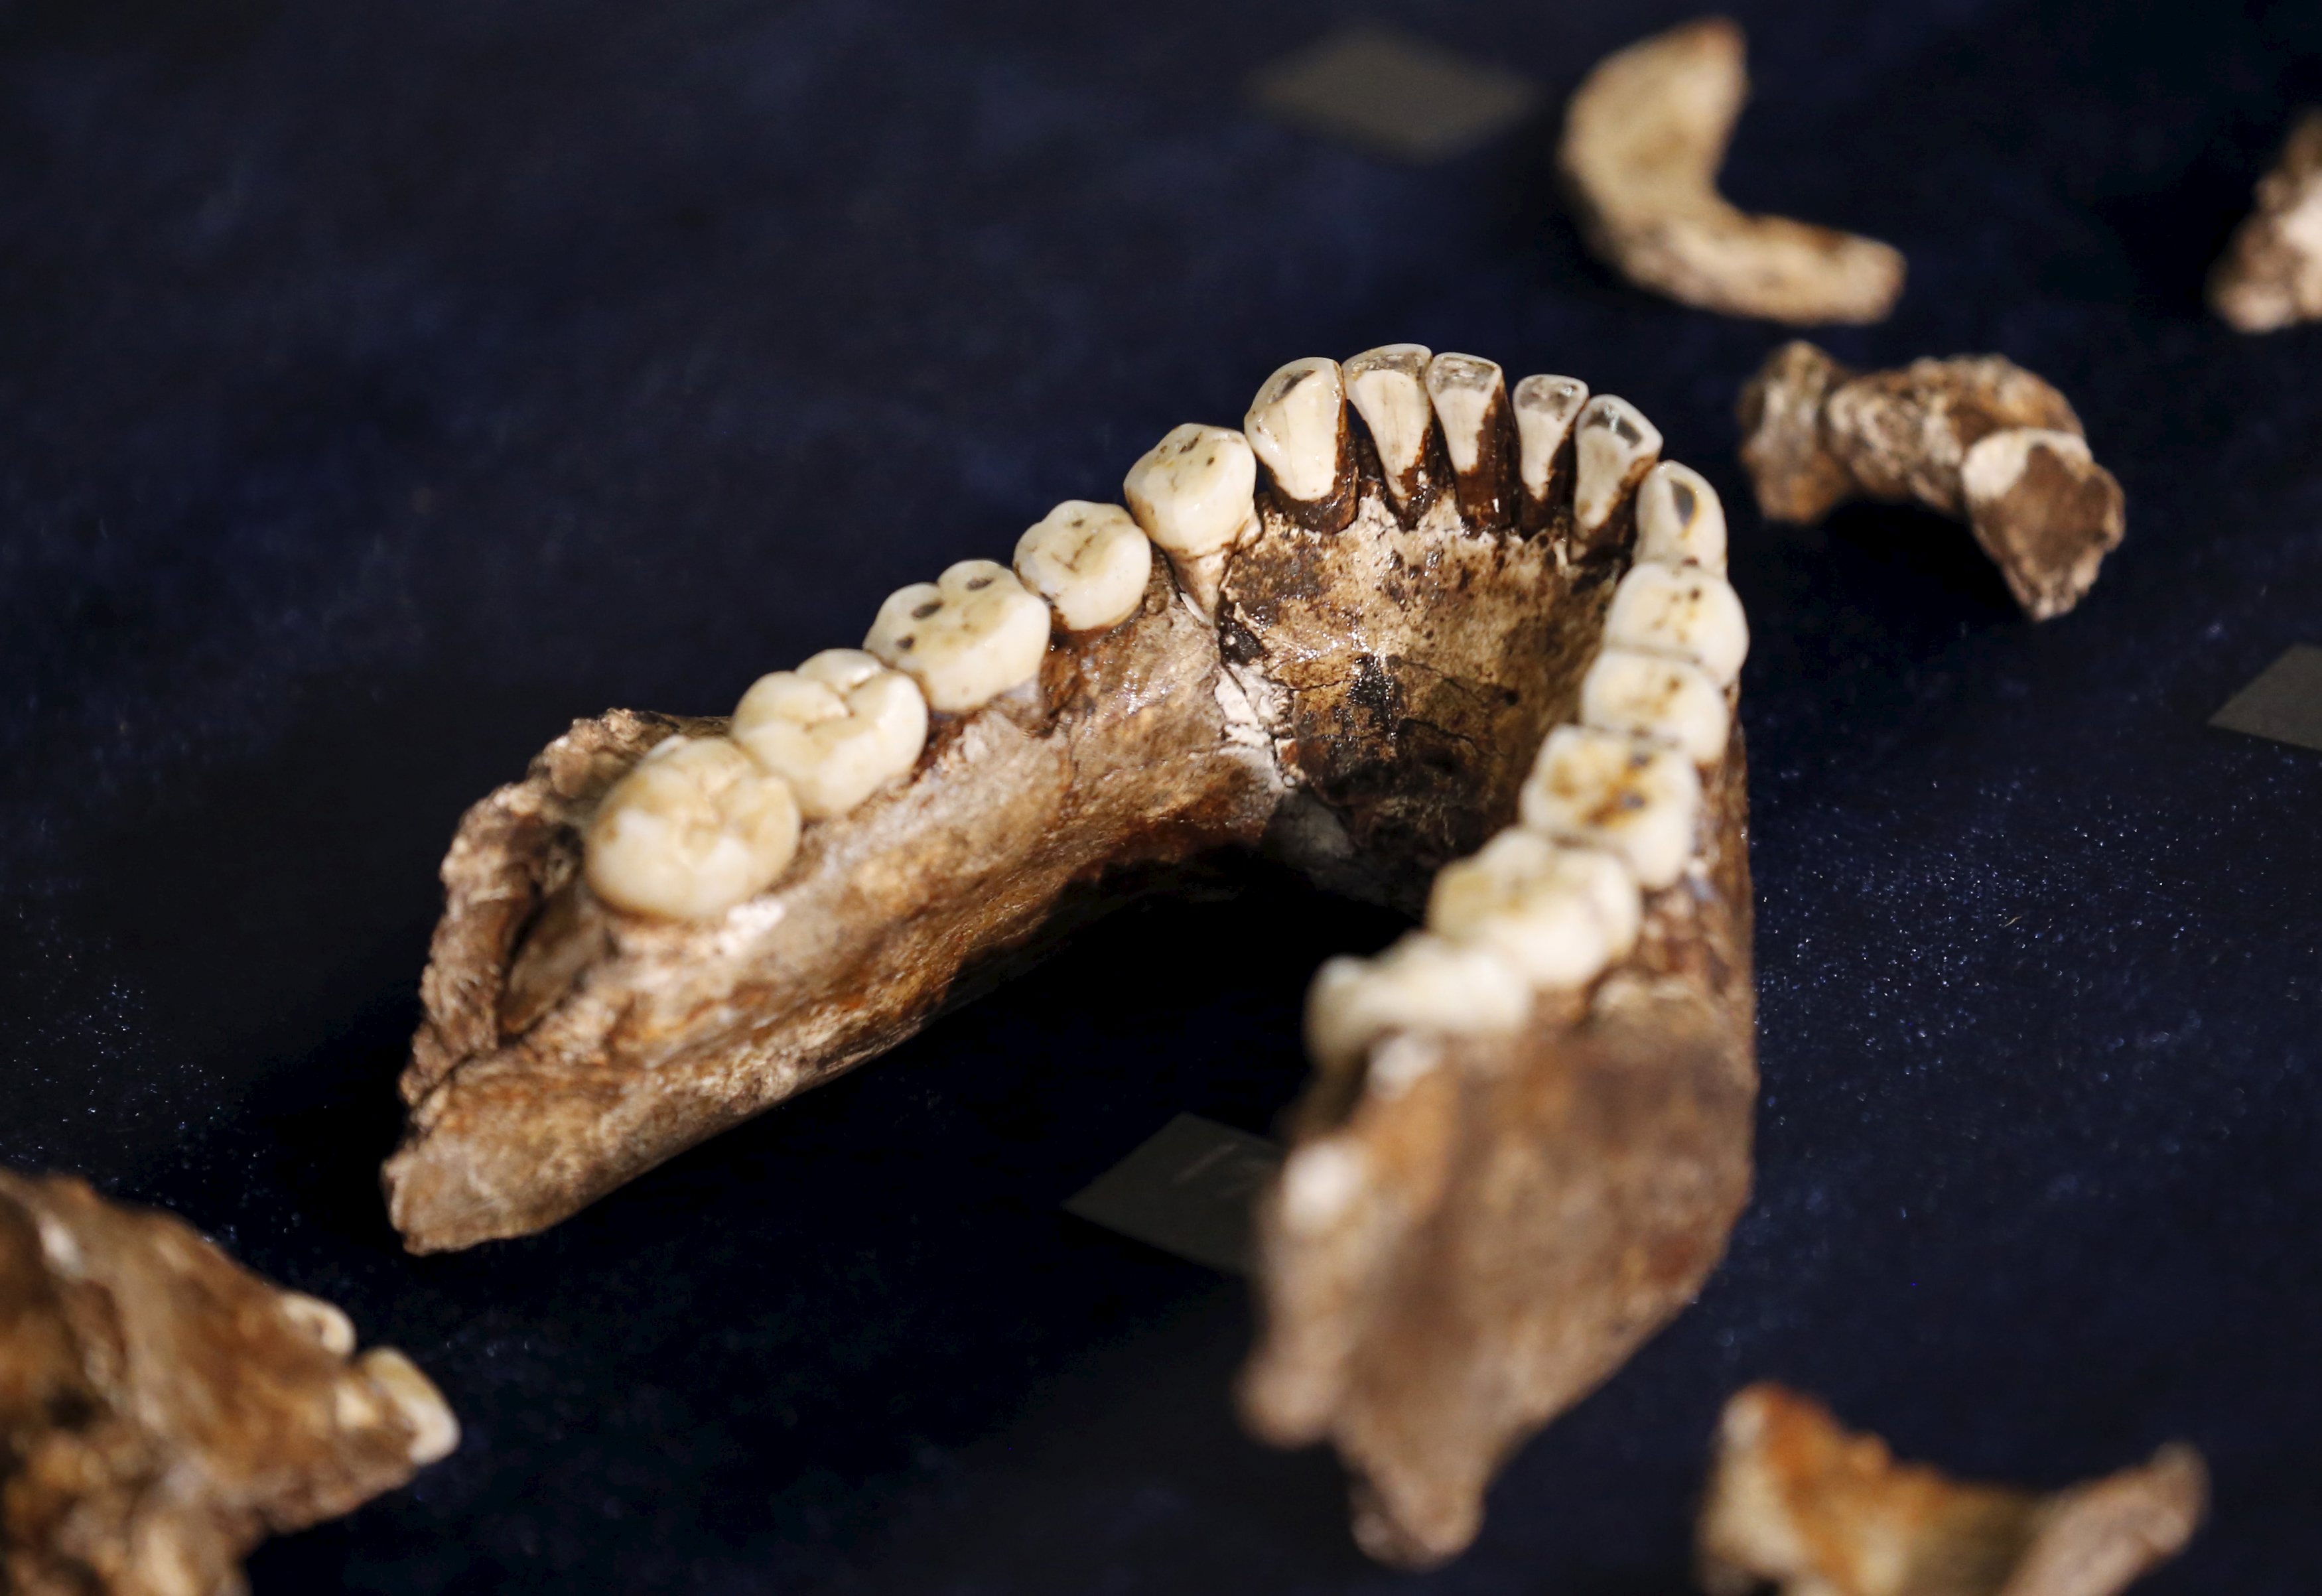 Fossils of a newly discovered ancient species, named "Homo naledi", are pictured during their unveiling outside Johannesburg September 10, 2015. Humanity's claim to uniqueness just suffered another setback: scientists reported on Thursday that the newly discovered ancient species related to humans also appeared to bury its dead. Fossils of the creature were unearthed in a deep cave near the famed sites of Sterkfontein and Swartkrans, treasure troves 50 km (30 miles) northwest of Johannesburg that have yielded pieces of the puzzle of human evolution for decades. The new species has been named 'Homo naledi', in honour of the "Rising Star" cave where it was found. Naledi means "star" in South Africa's Sesotho language. REUTERS/Siphiwe Sibeko